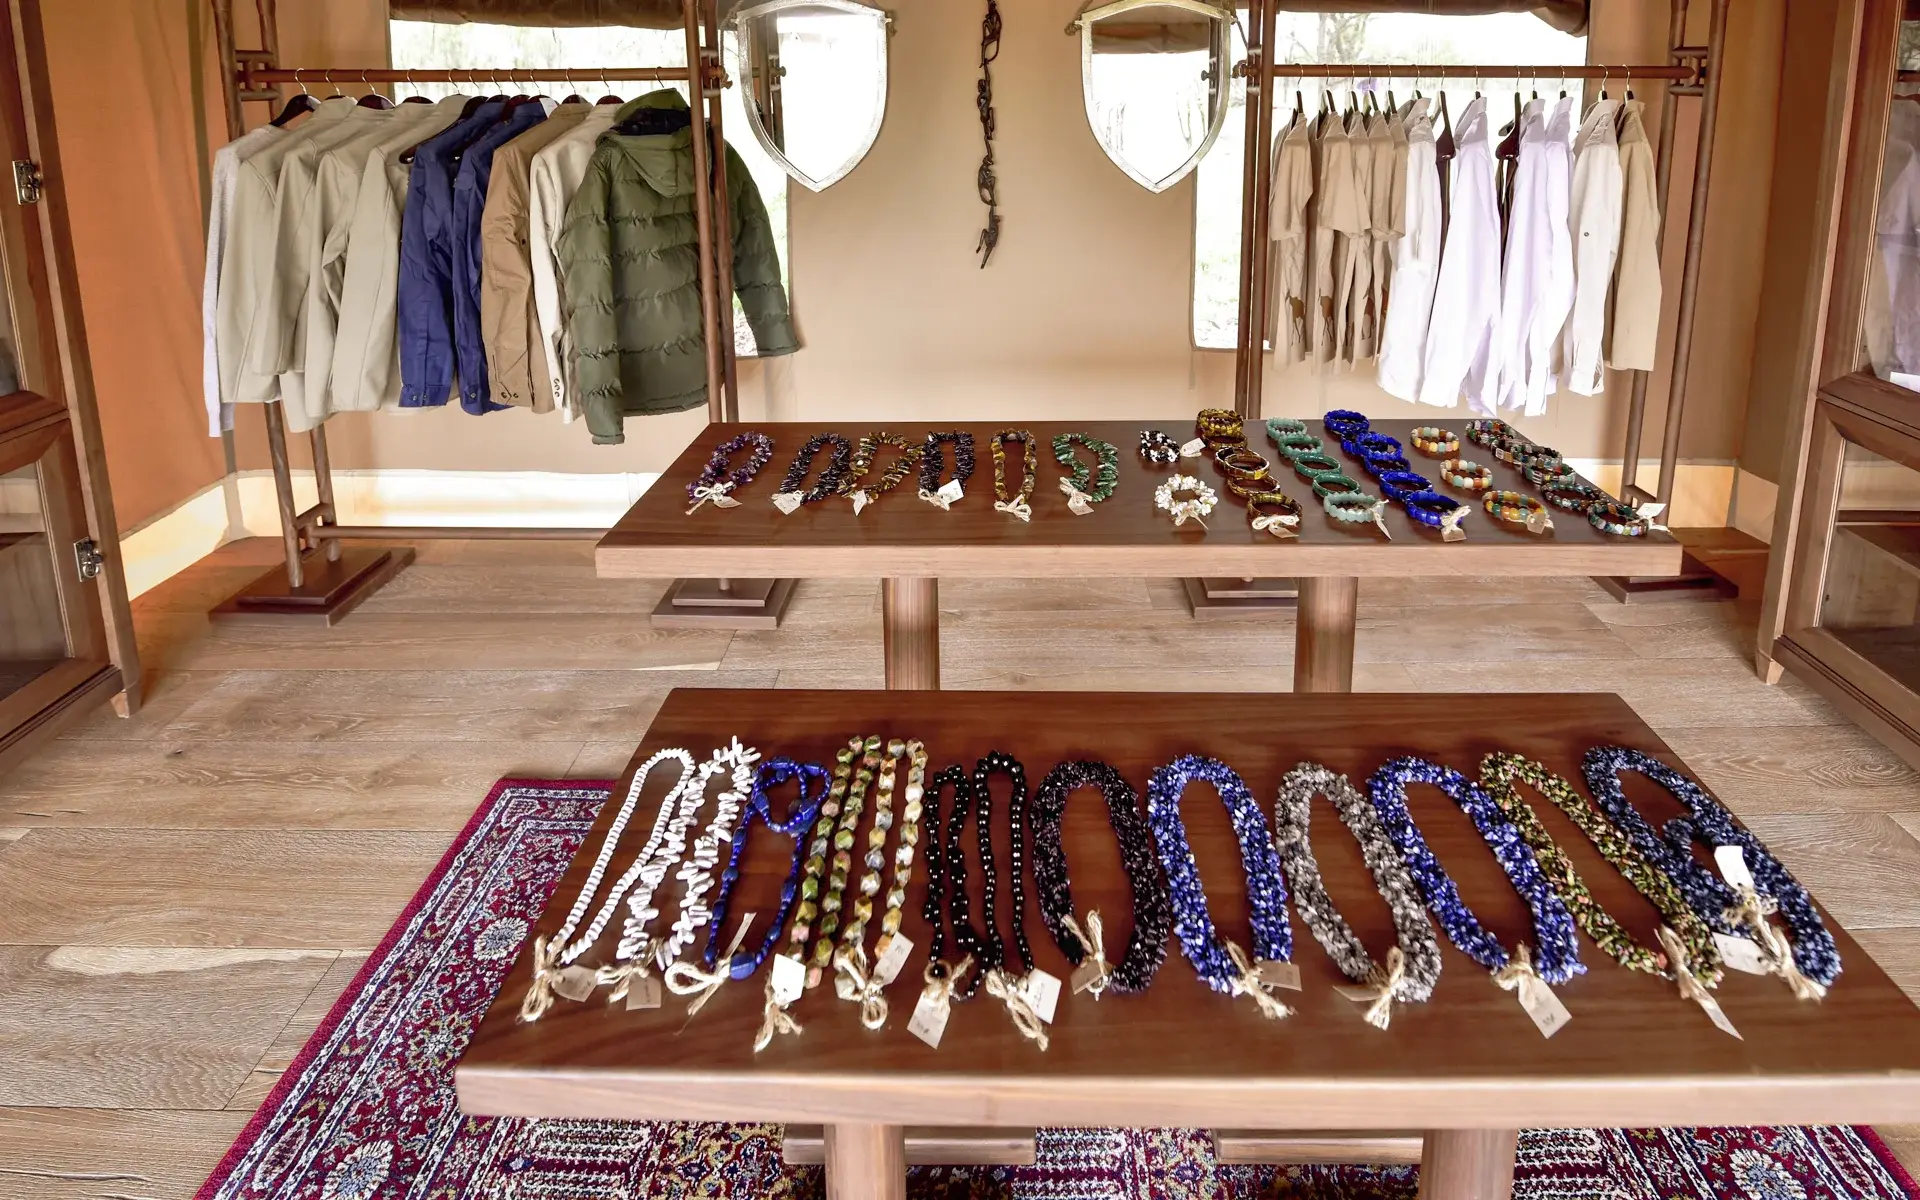 Things to buy on an African Safari